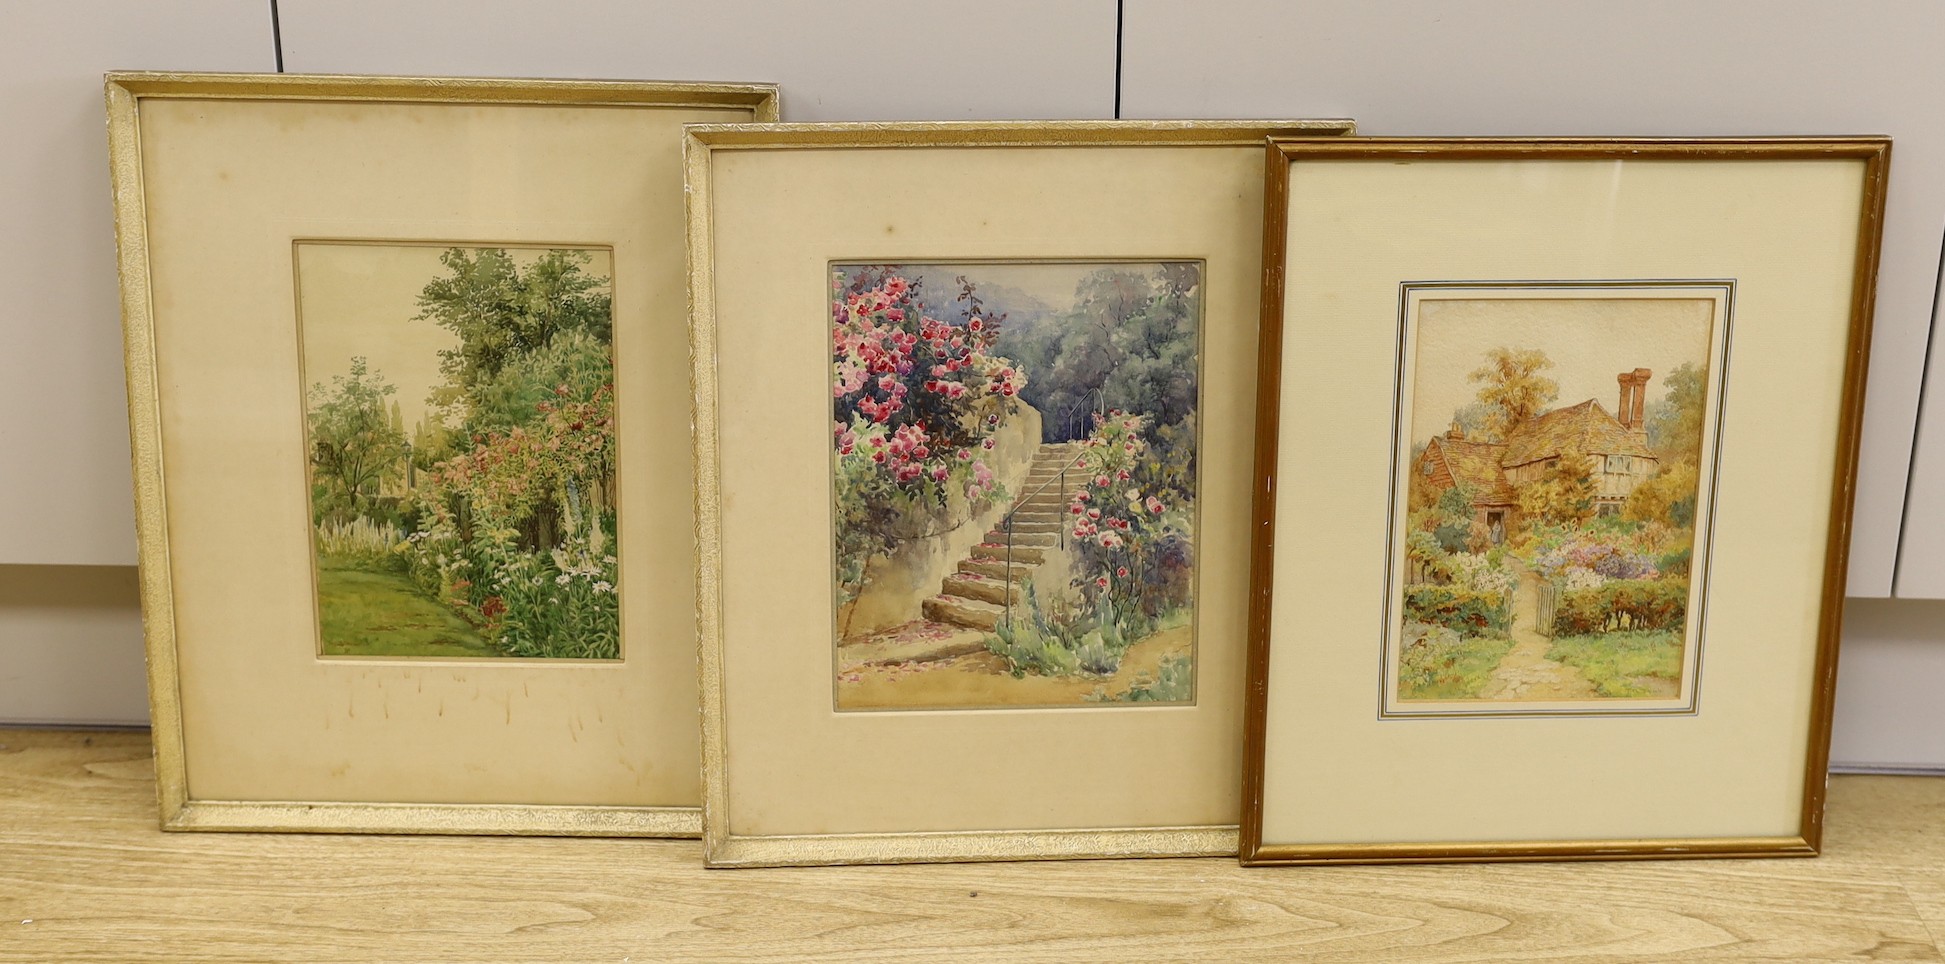 Thomas N. Tyndale (1860-1930), three watercolours, Garden scenes, one signed, largest 28 x 22cm